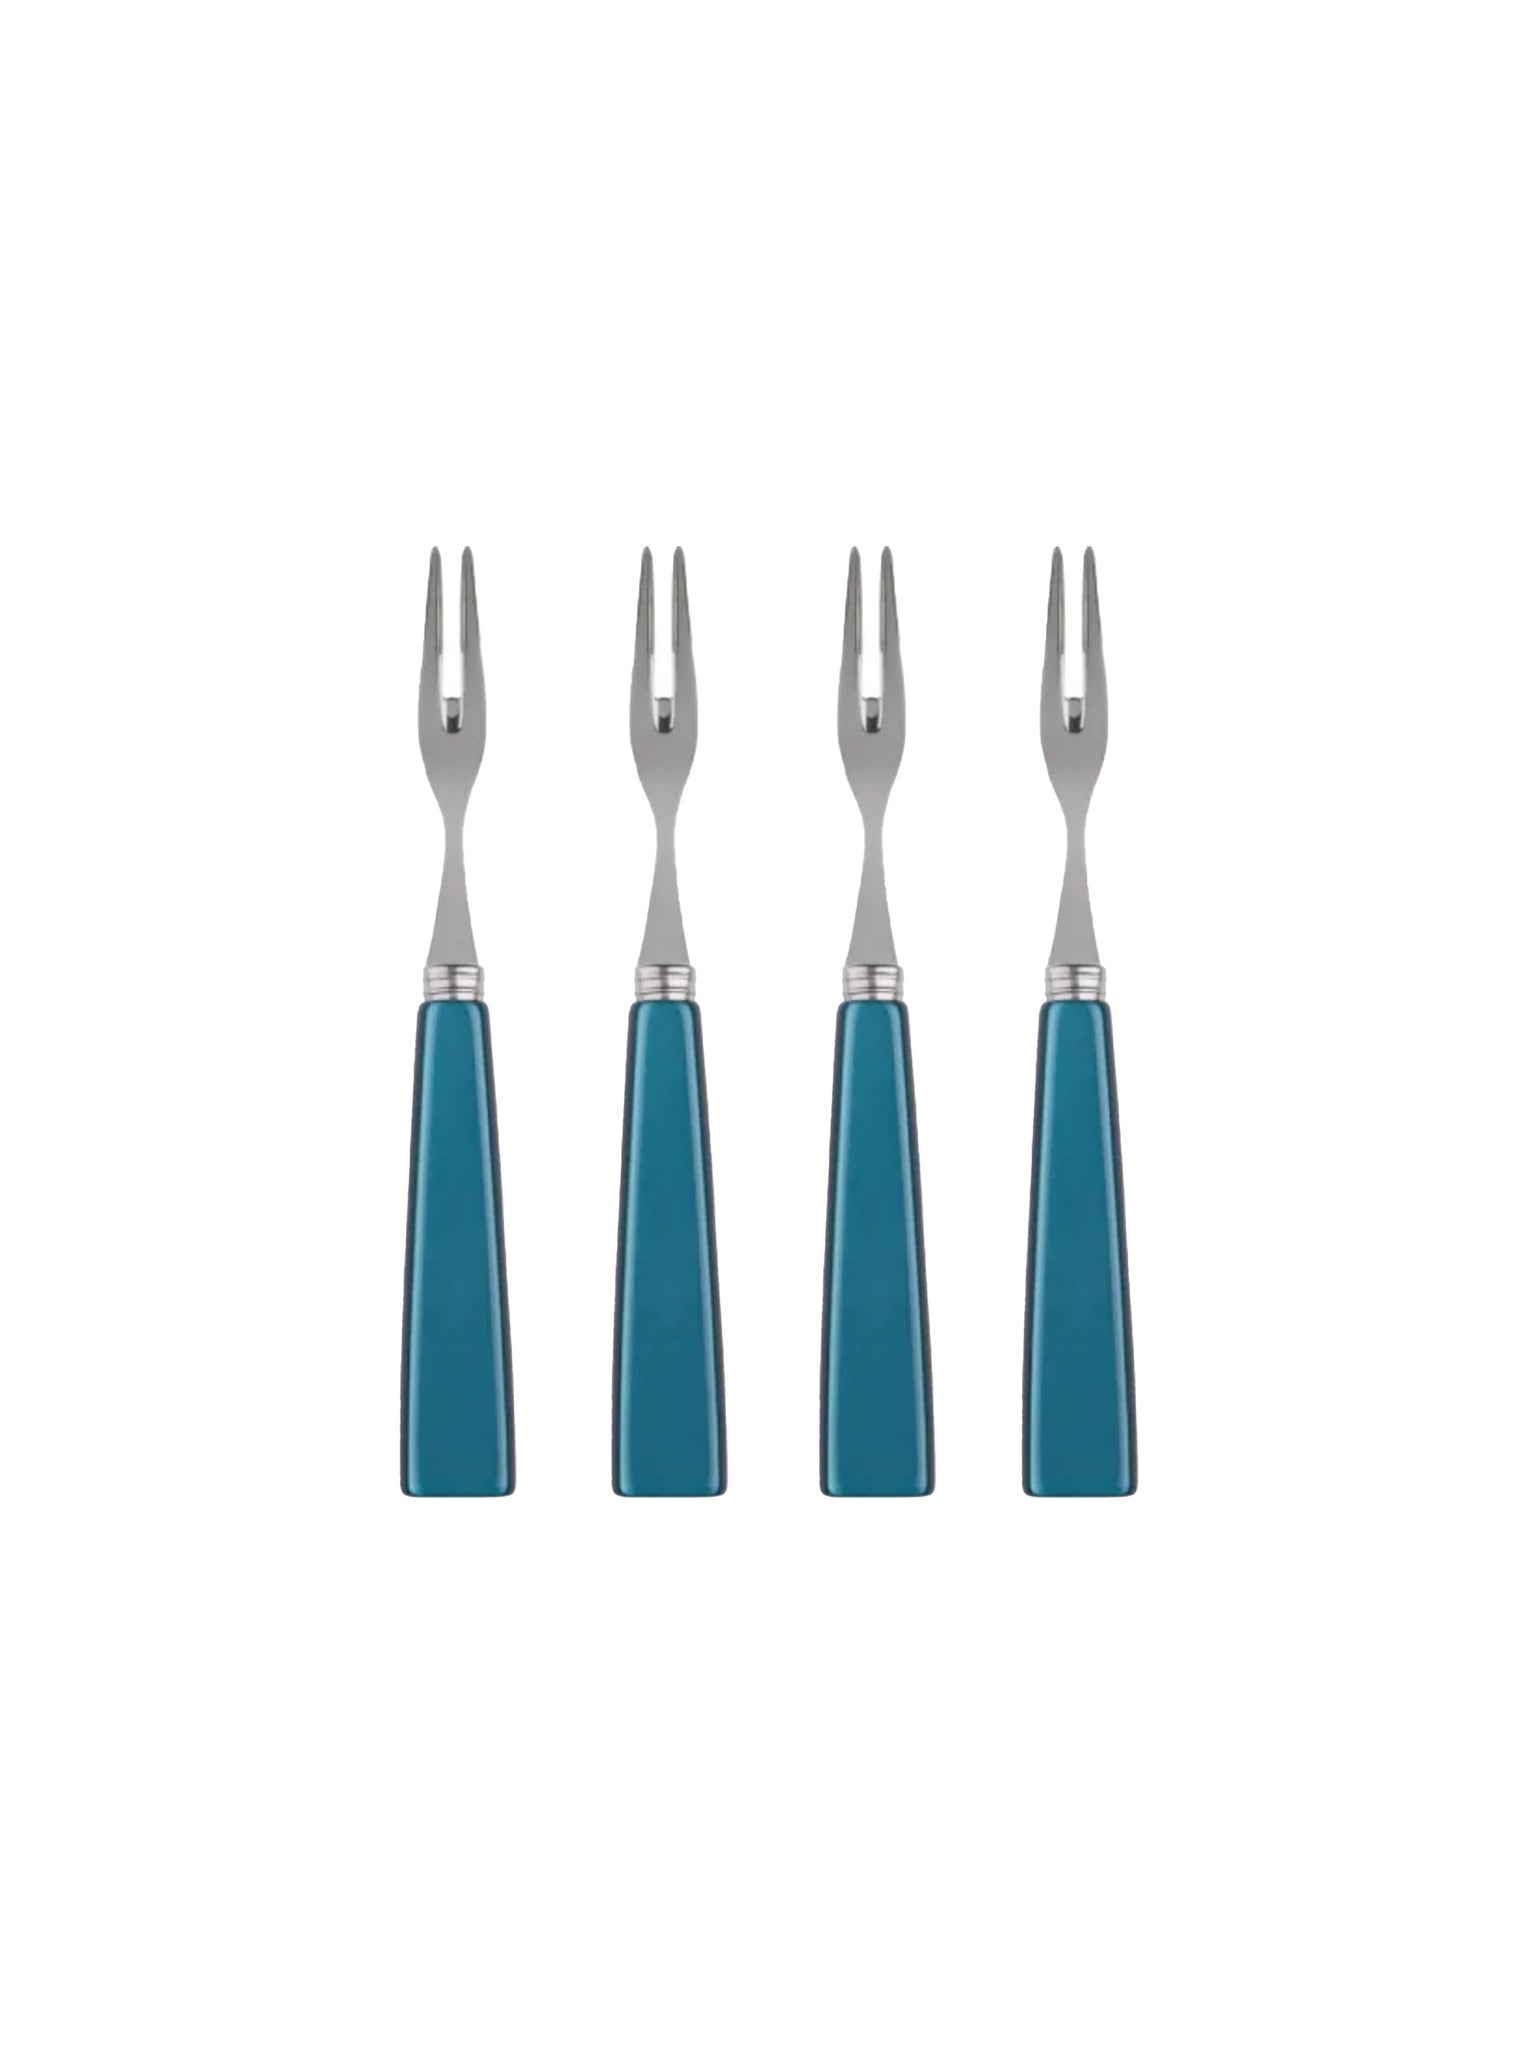 Sabre Paris Icone Turquoise Cocktail Forks Set of Four Weston Table